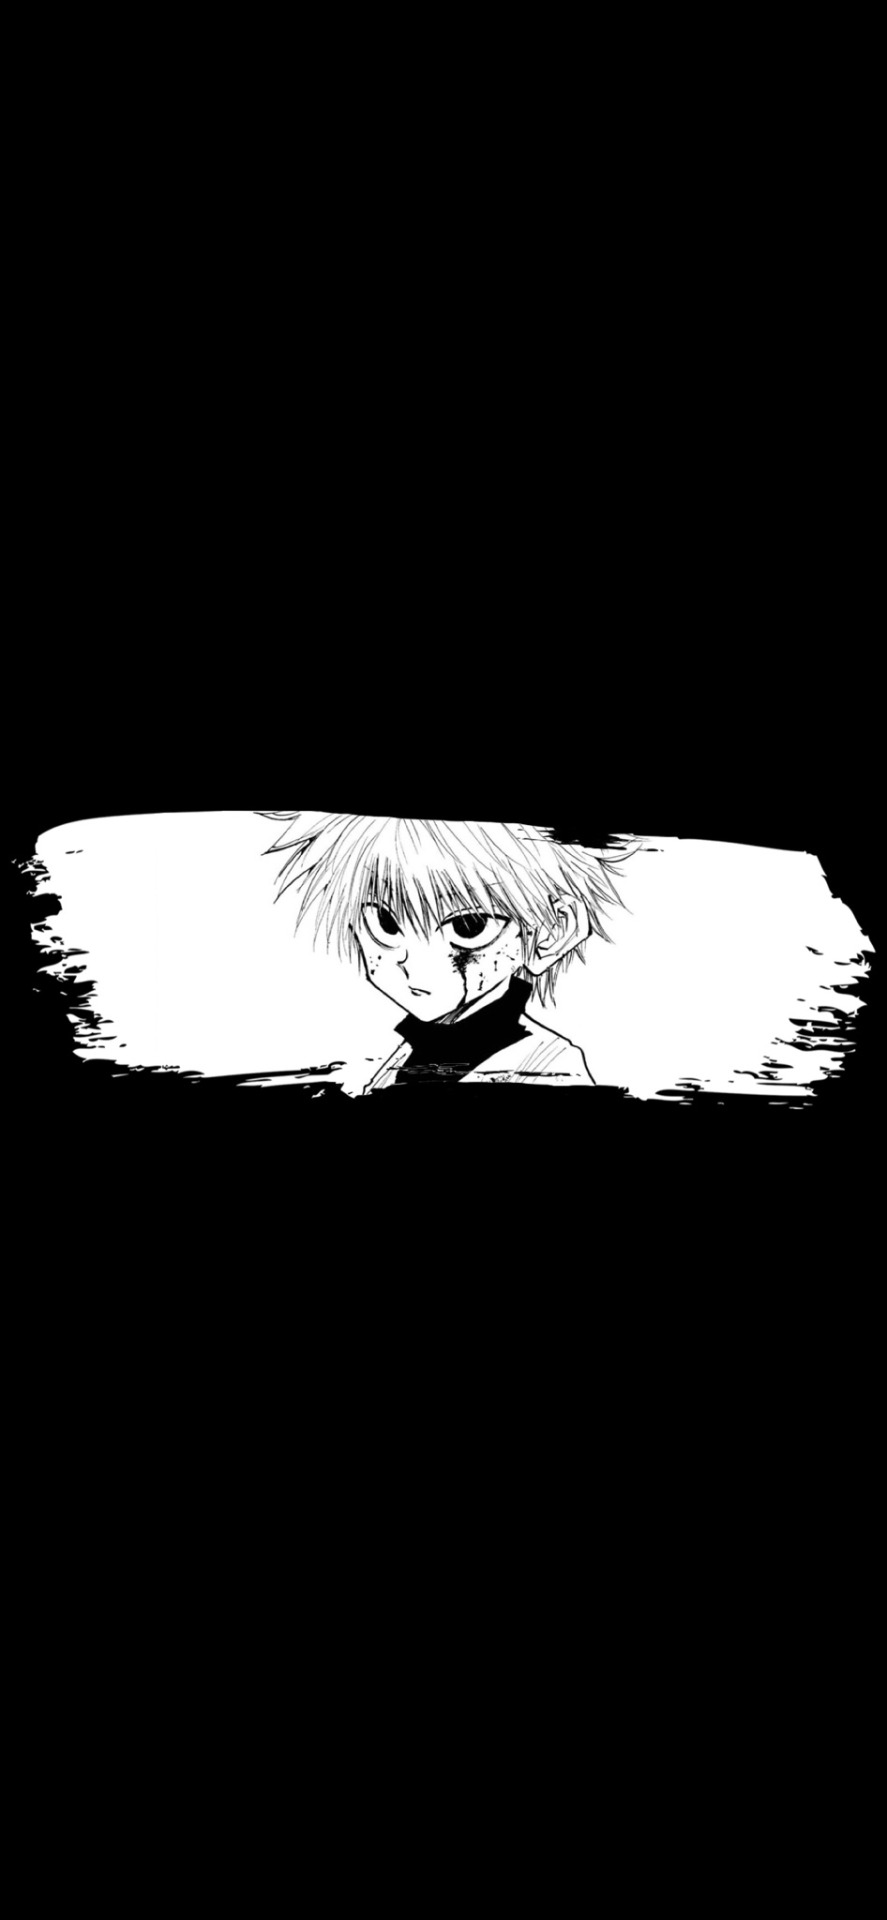 Ifly Killua Z Wallpaper Or If You Save